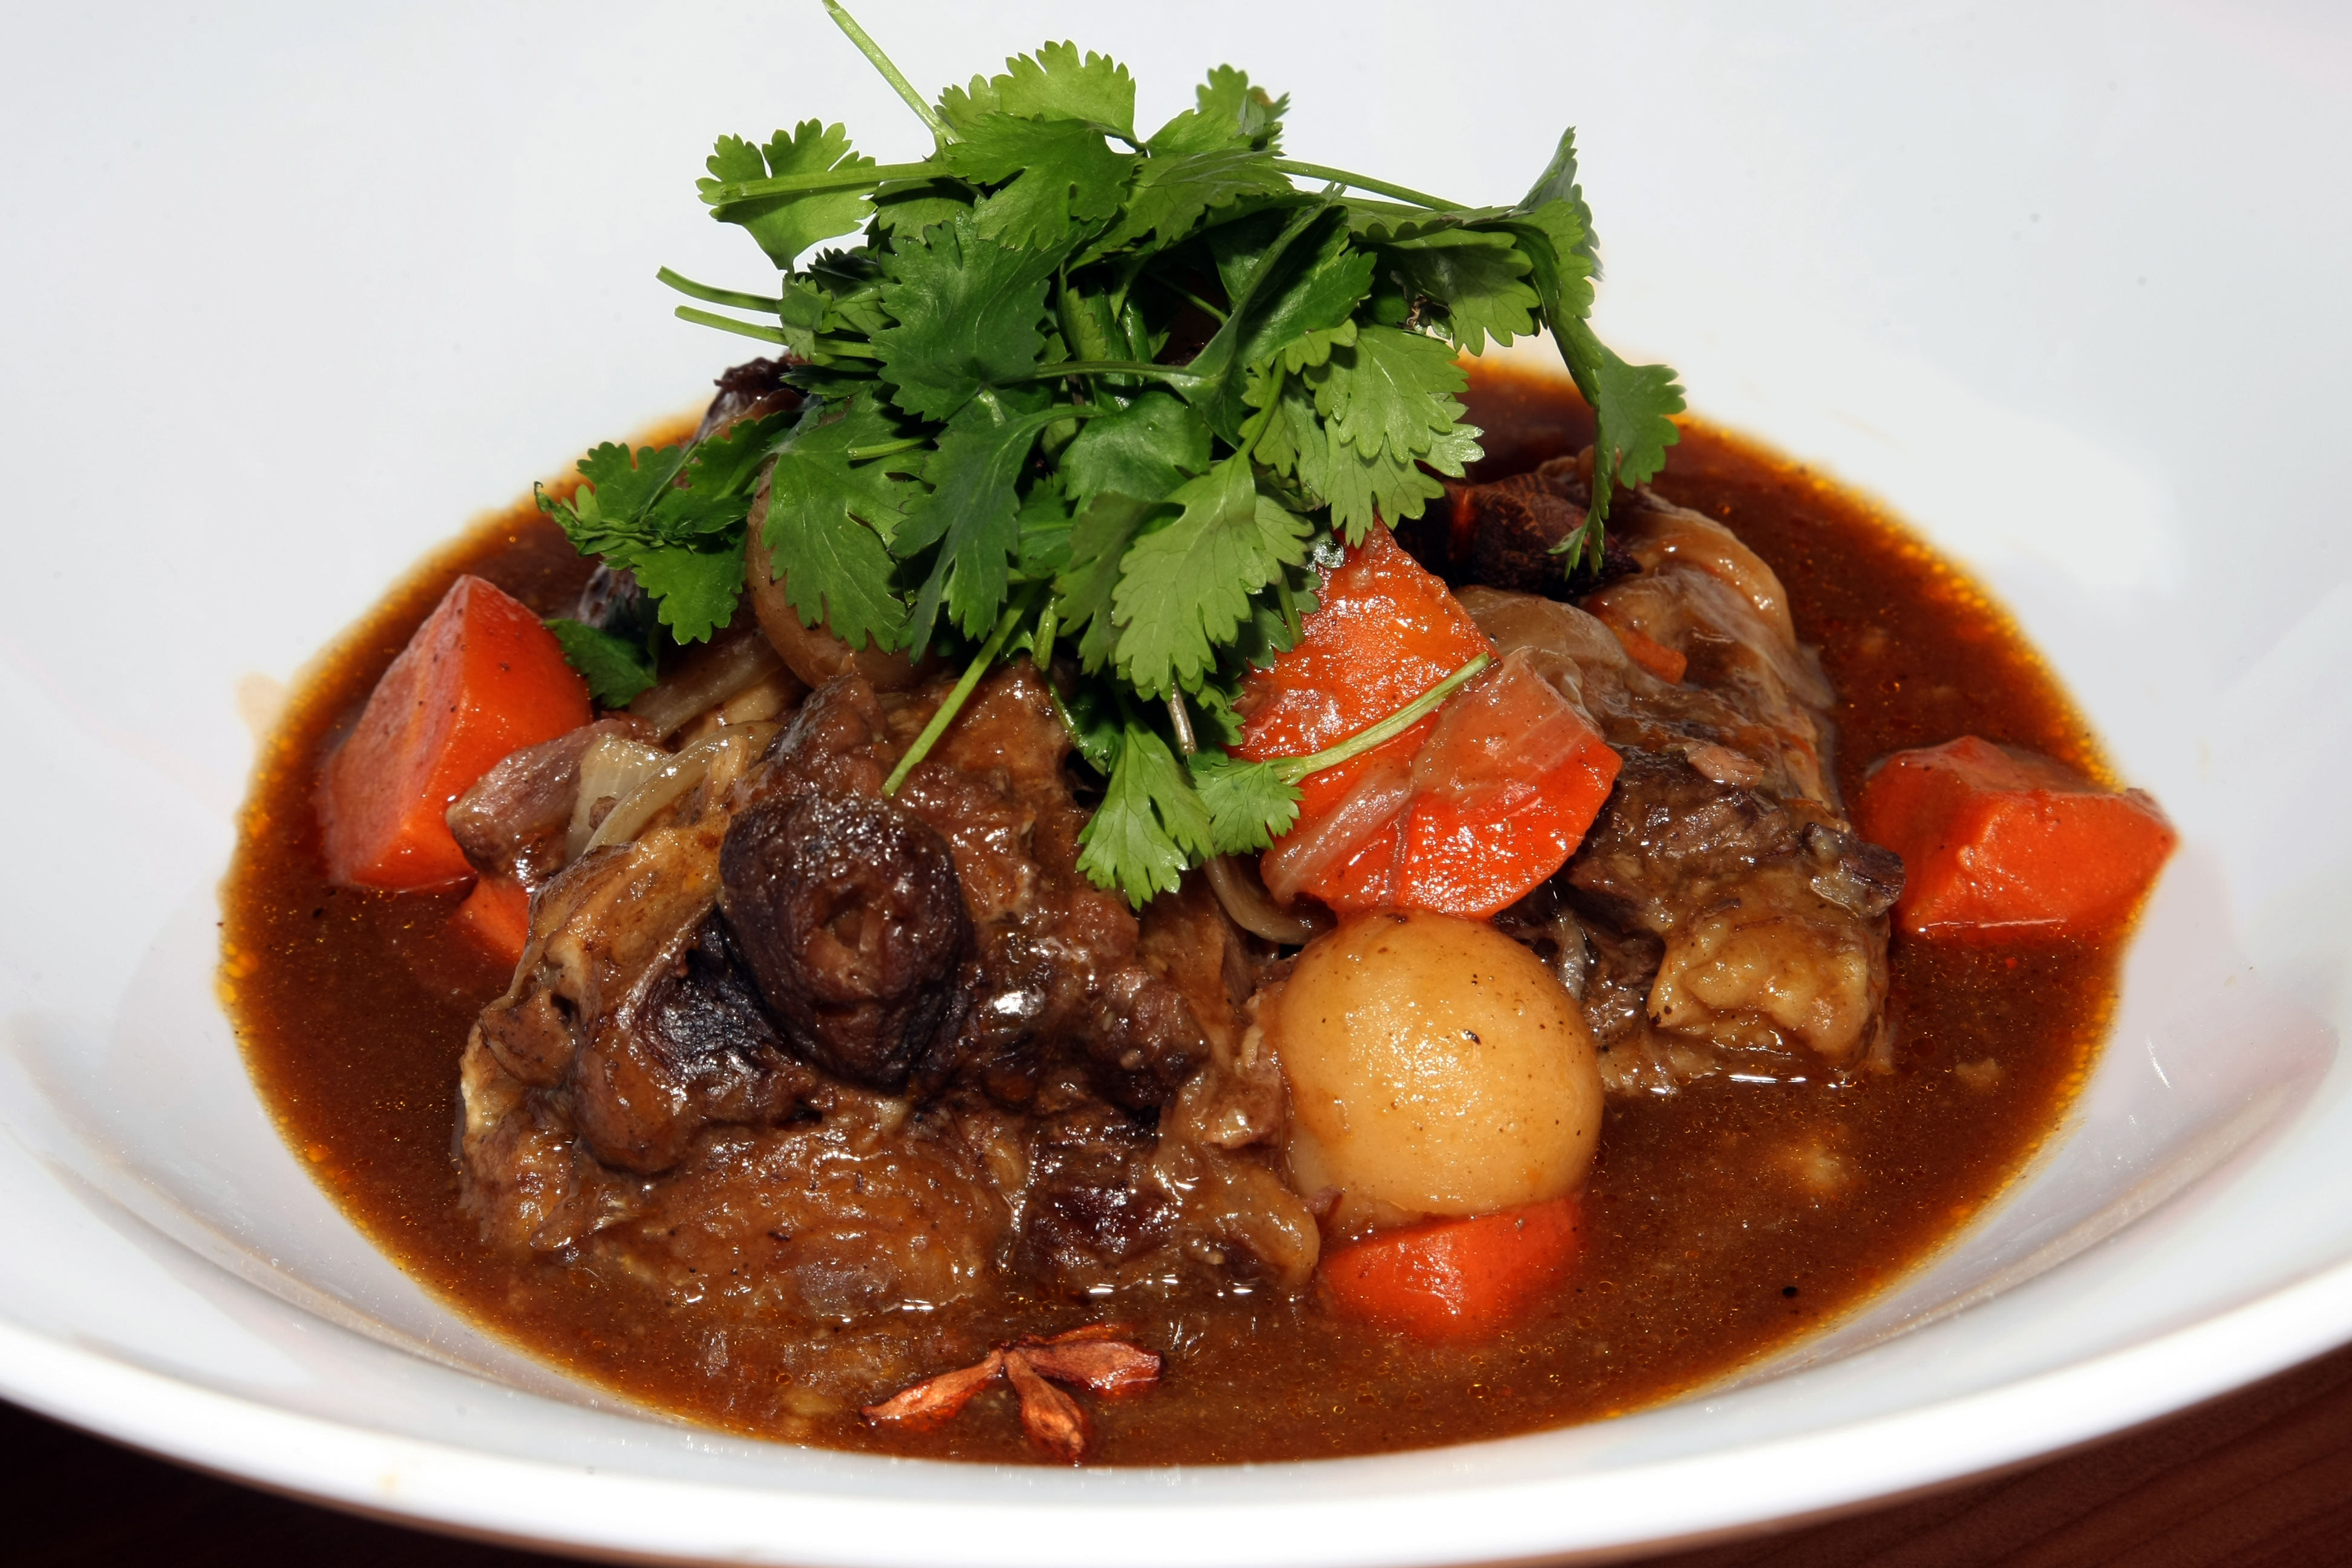 The famous oxtail soup at Market Street Cafe